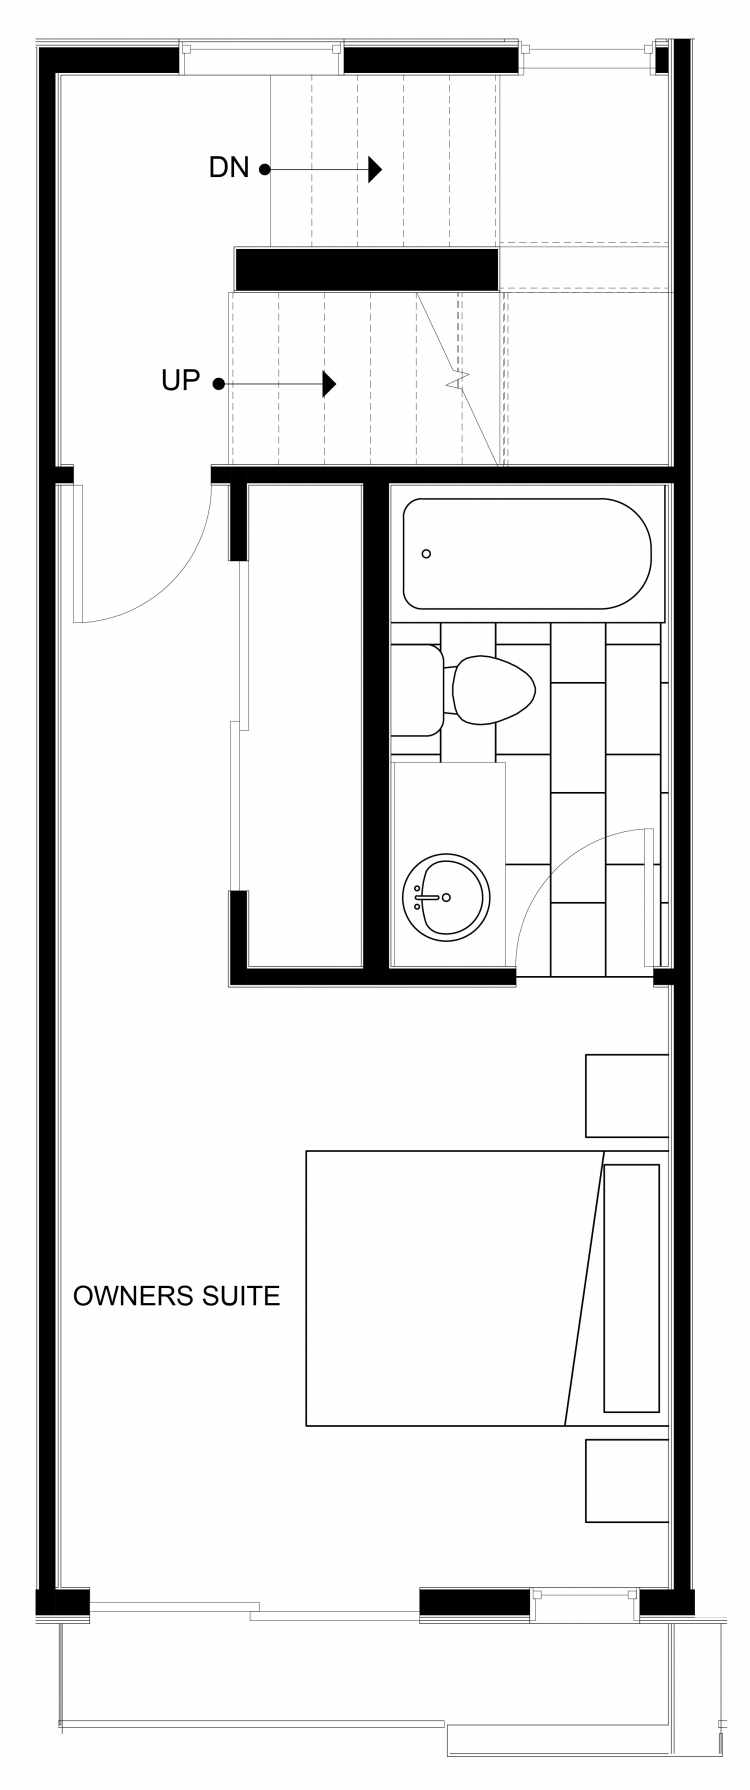 Fourth Floor Plan of 1540 15th Ave E, One of the Grandview Townhomes in Capitol Hill